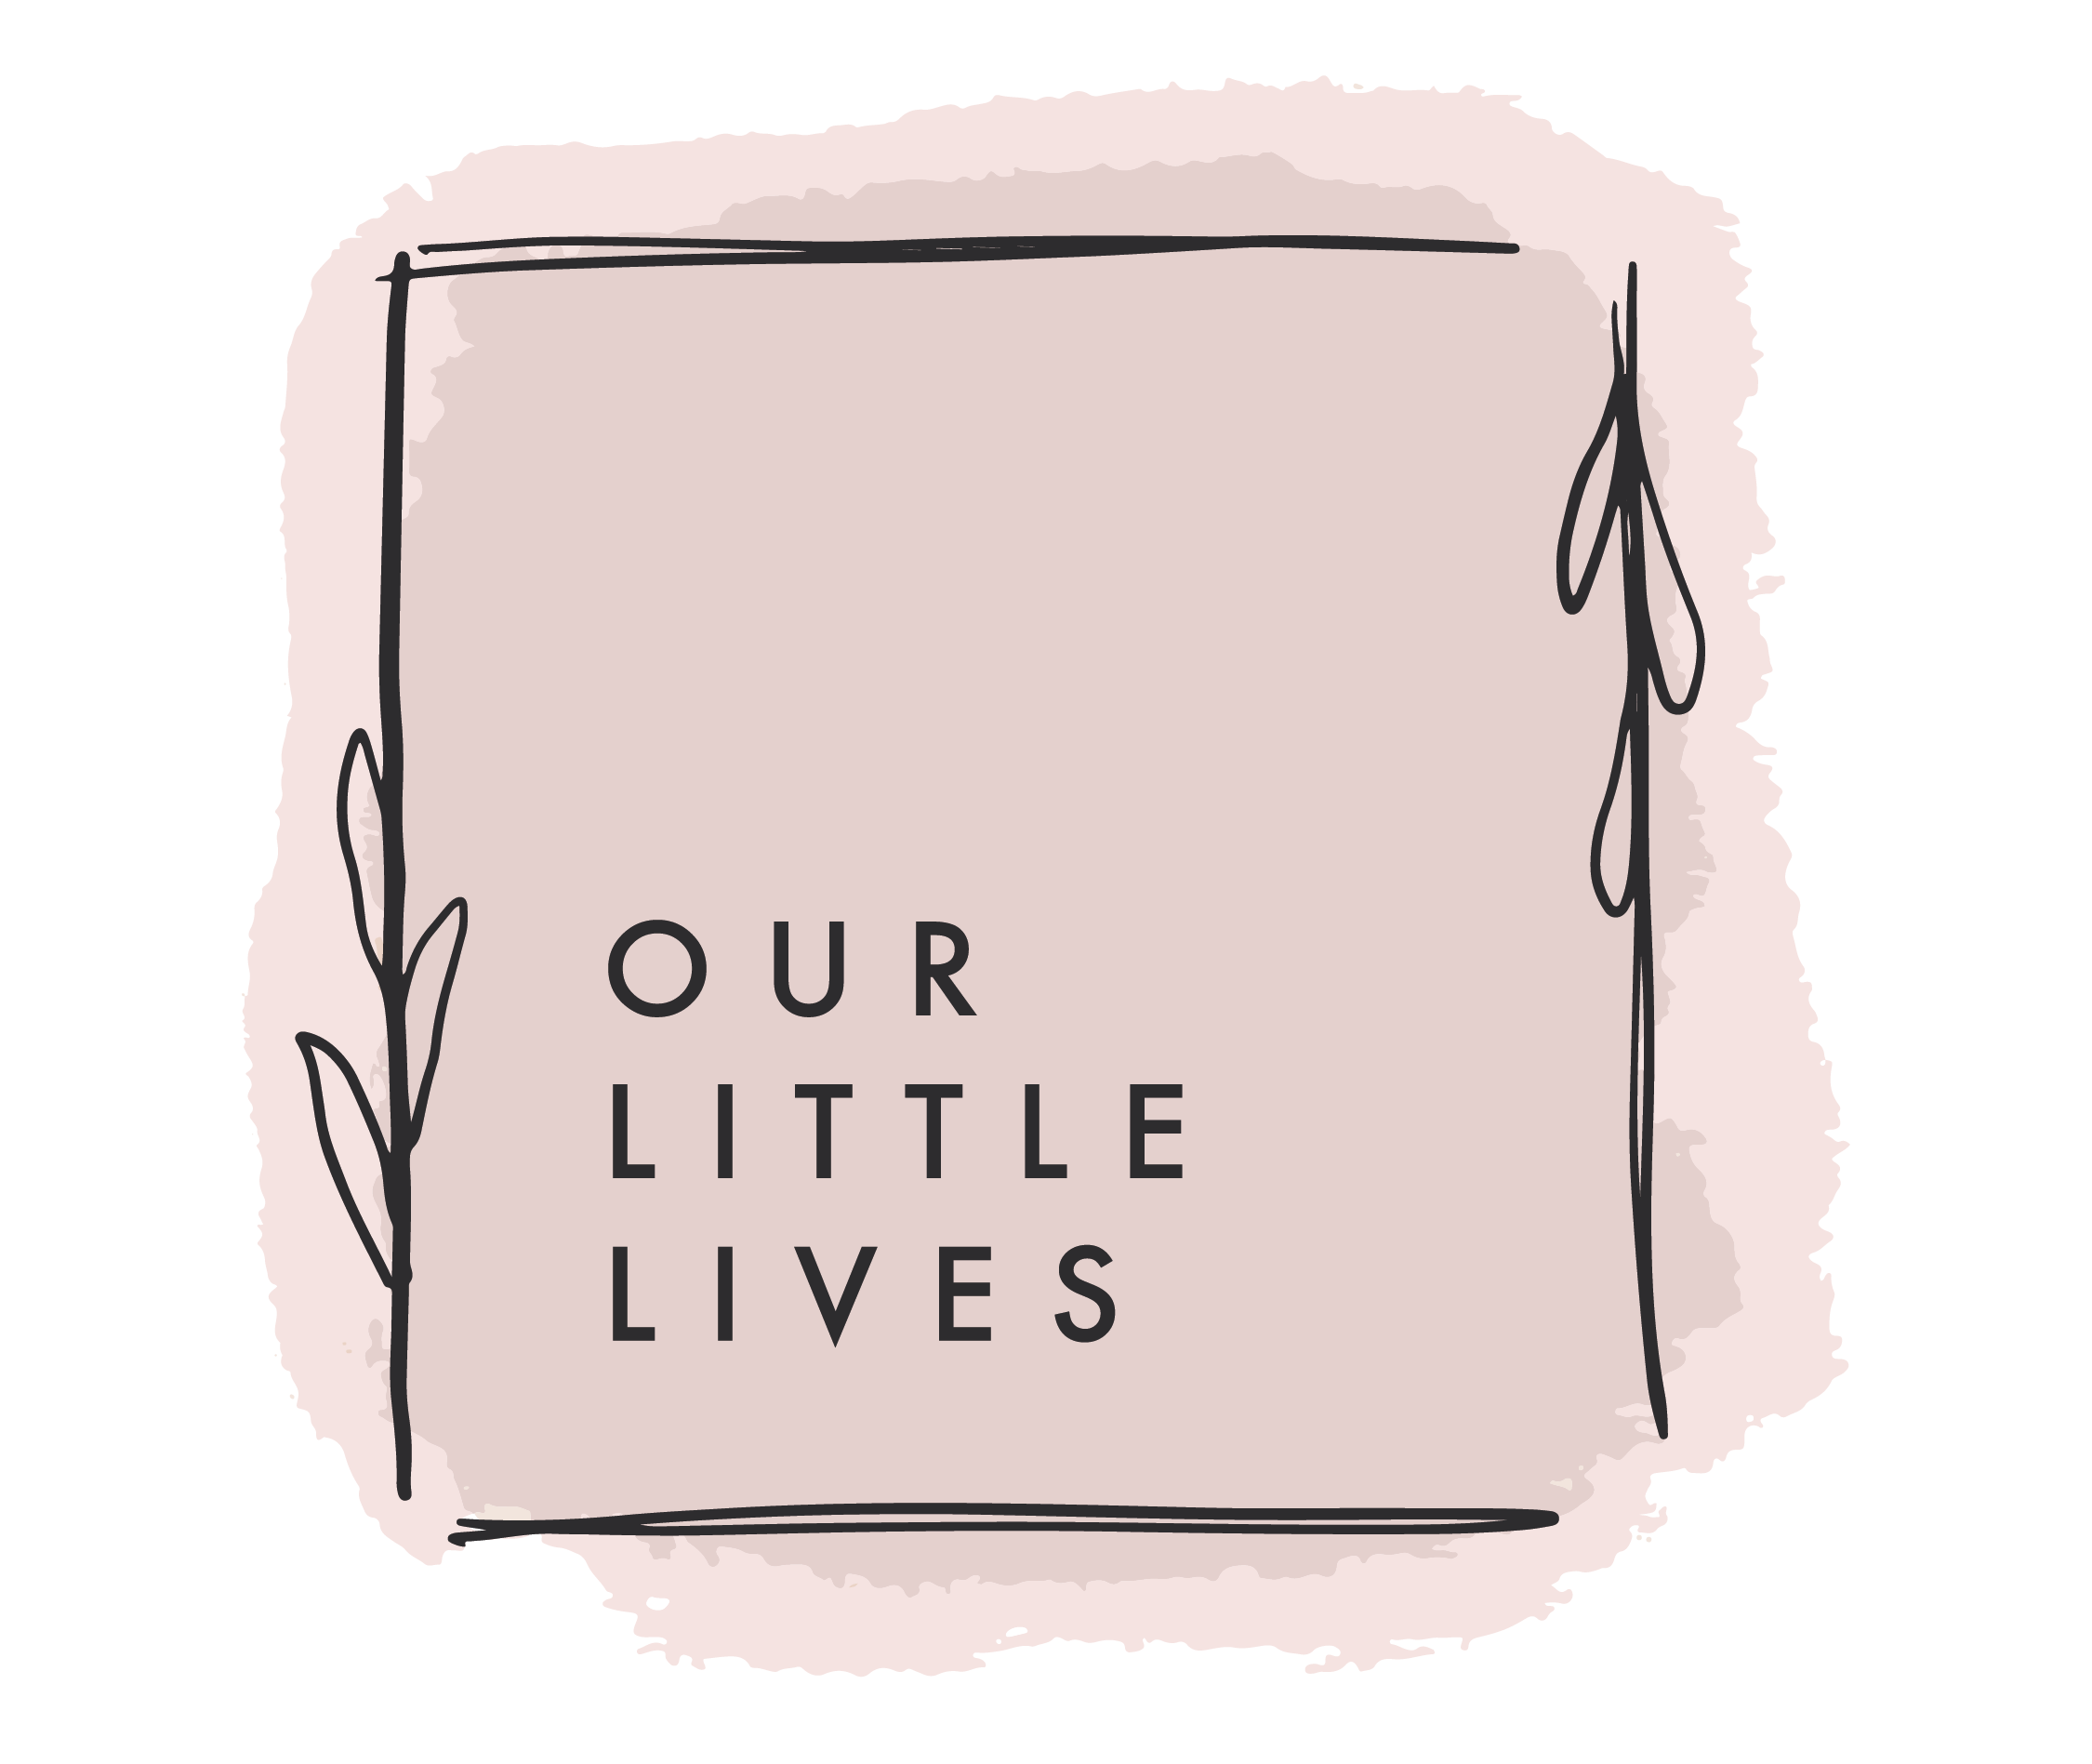 OUR LITTLE LIVES